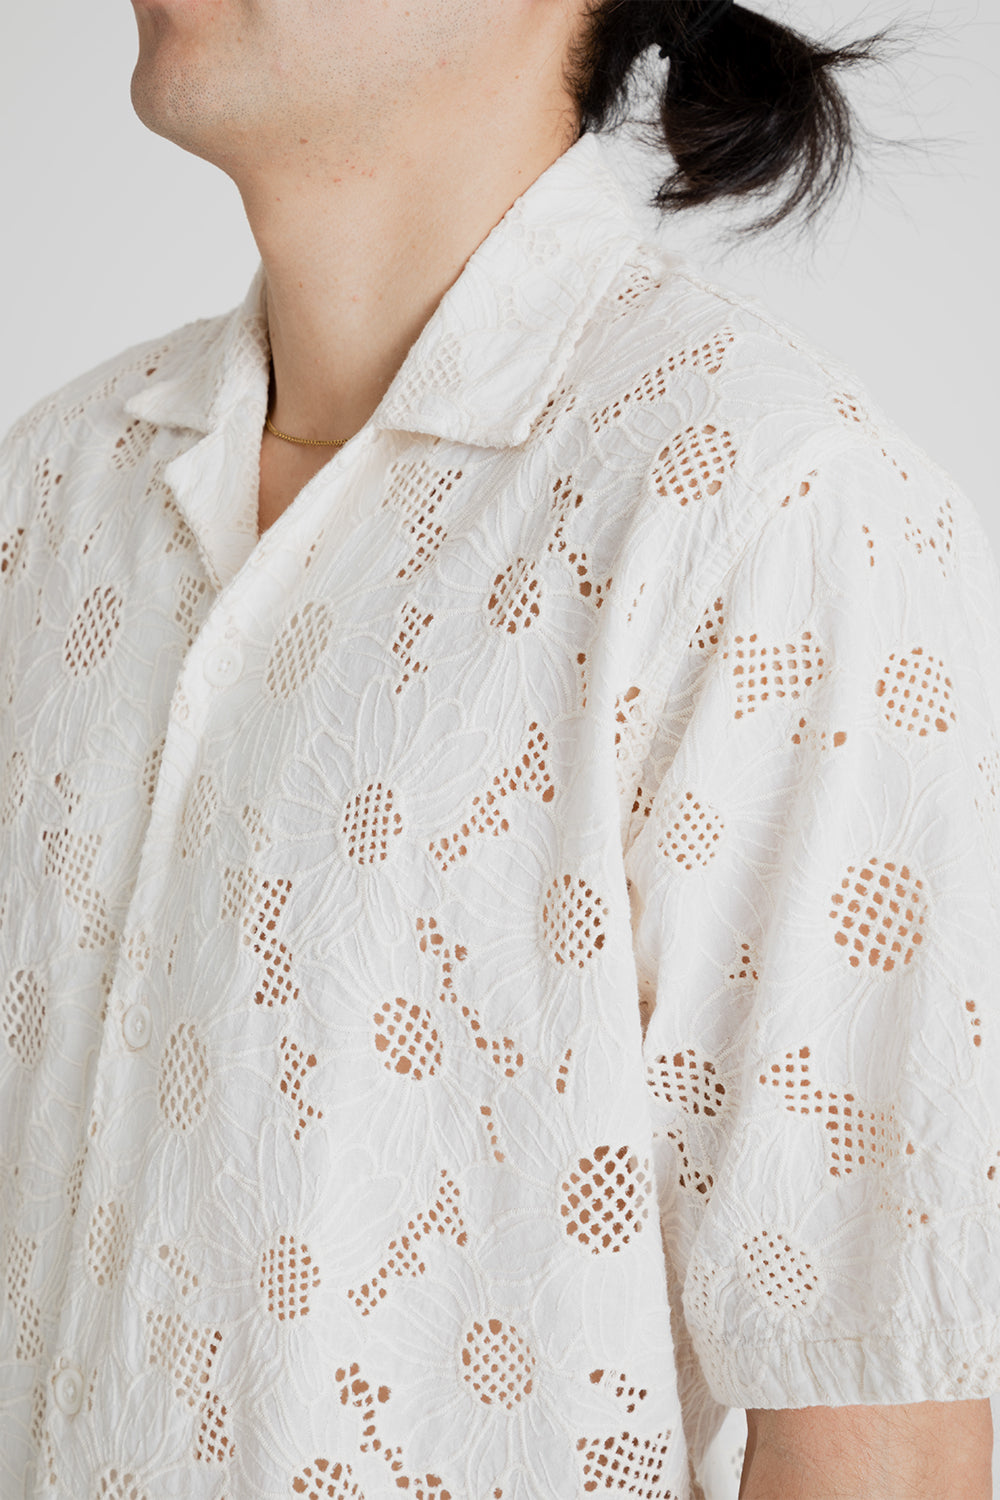 Sunflower Cayo SS Shirt in White | Wallace Mercantile Shop